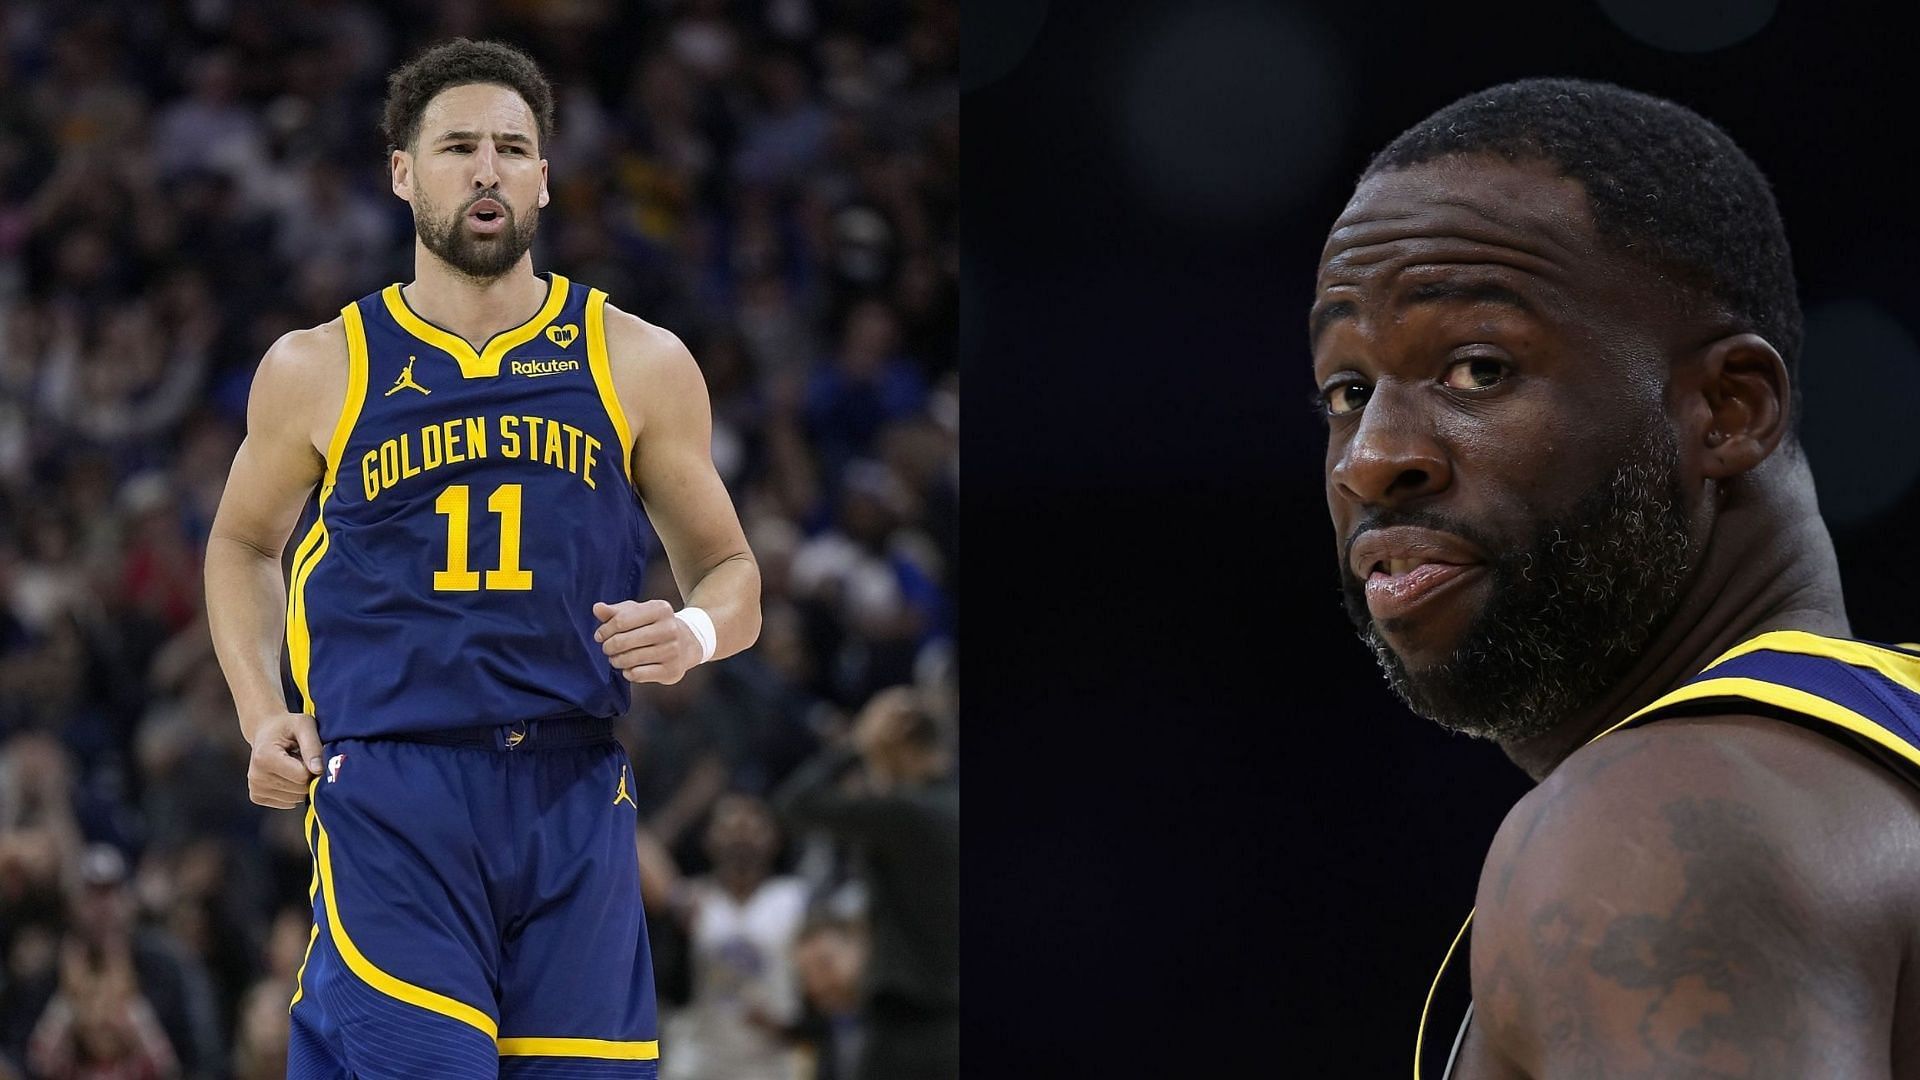 Klay Thompson shared his insight on what makes Draymond Green so important to the Golden State Warriors